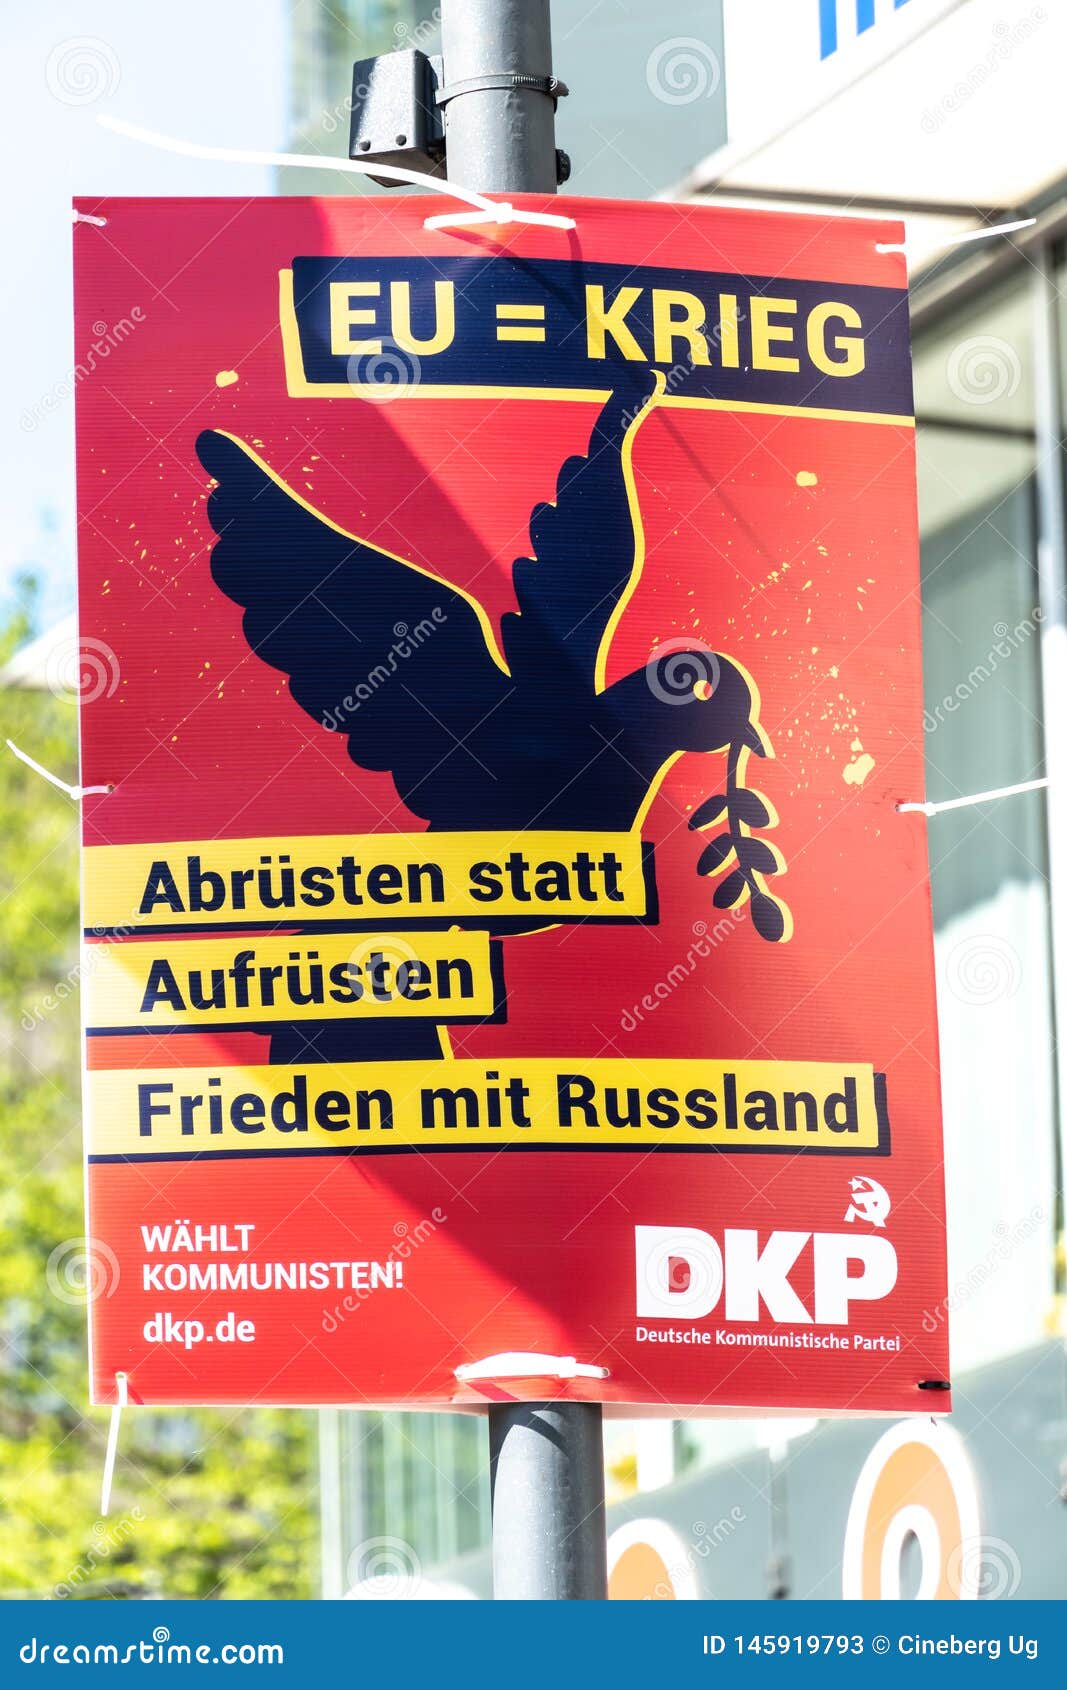 DKP Political Editorial Stock Photo Image of german, elections: 145919793